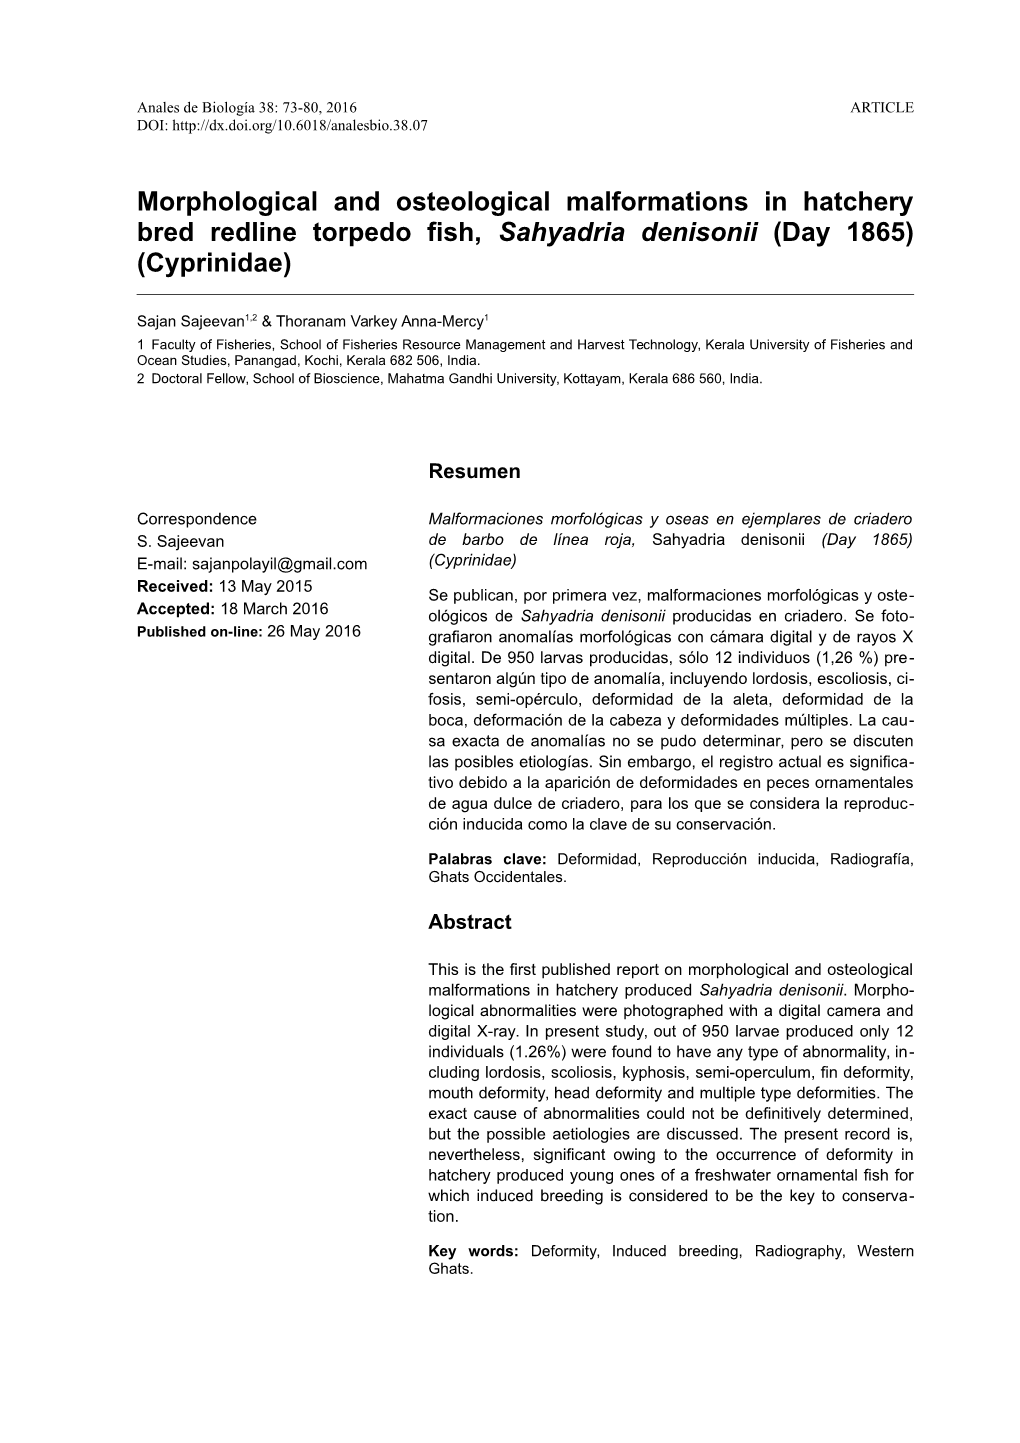 Morphological and Osteological Malformations in Hatchery Bred Redline Torpedo Fish, Sahyadria Denisonii (Day 1865) (Cyprinidae)